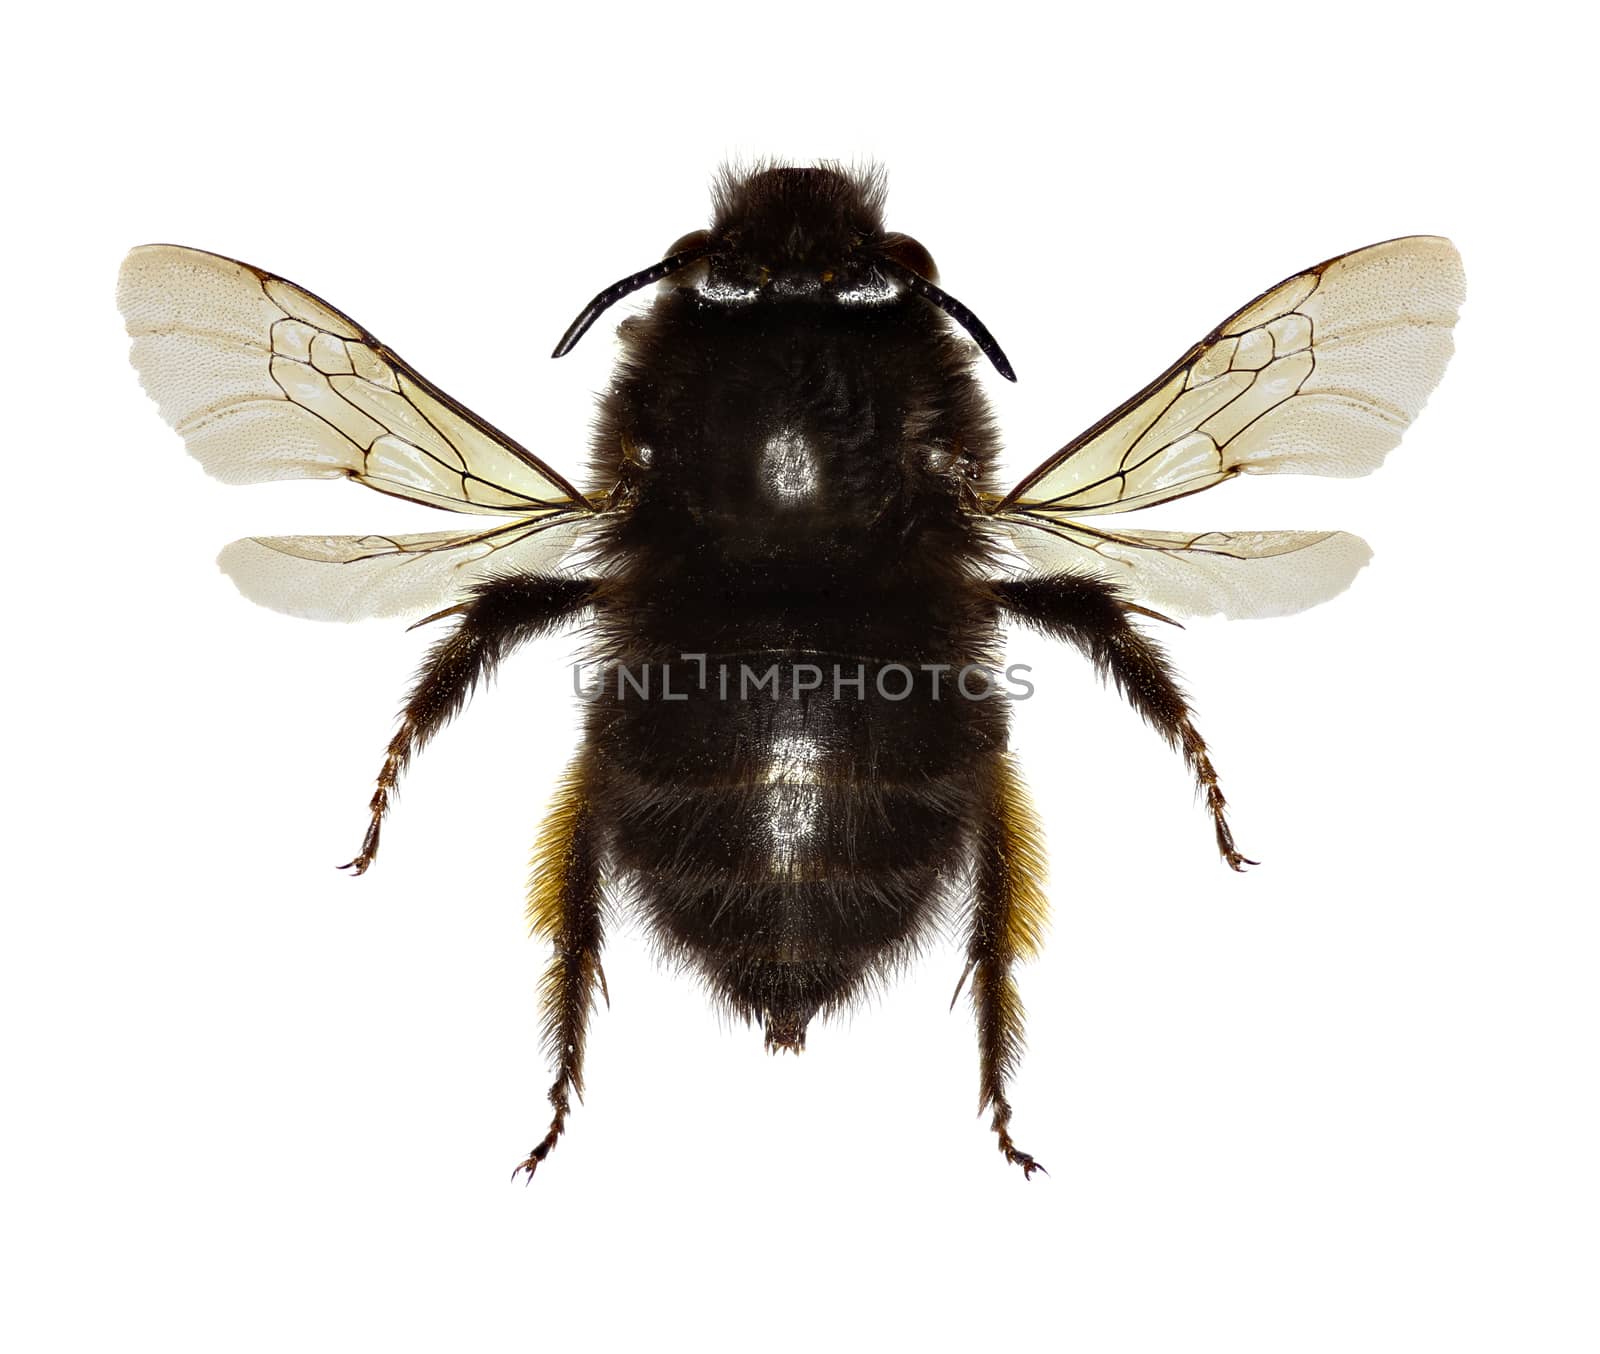 Hairy-footed Flower Bee on white Background  -  Anthophora plumipes (Pallas,1772) by gstalker